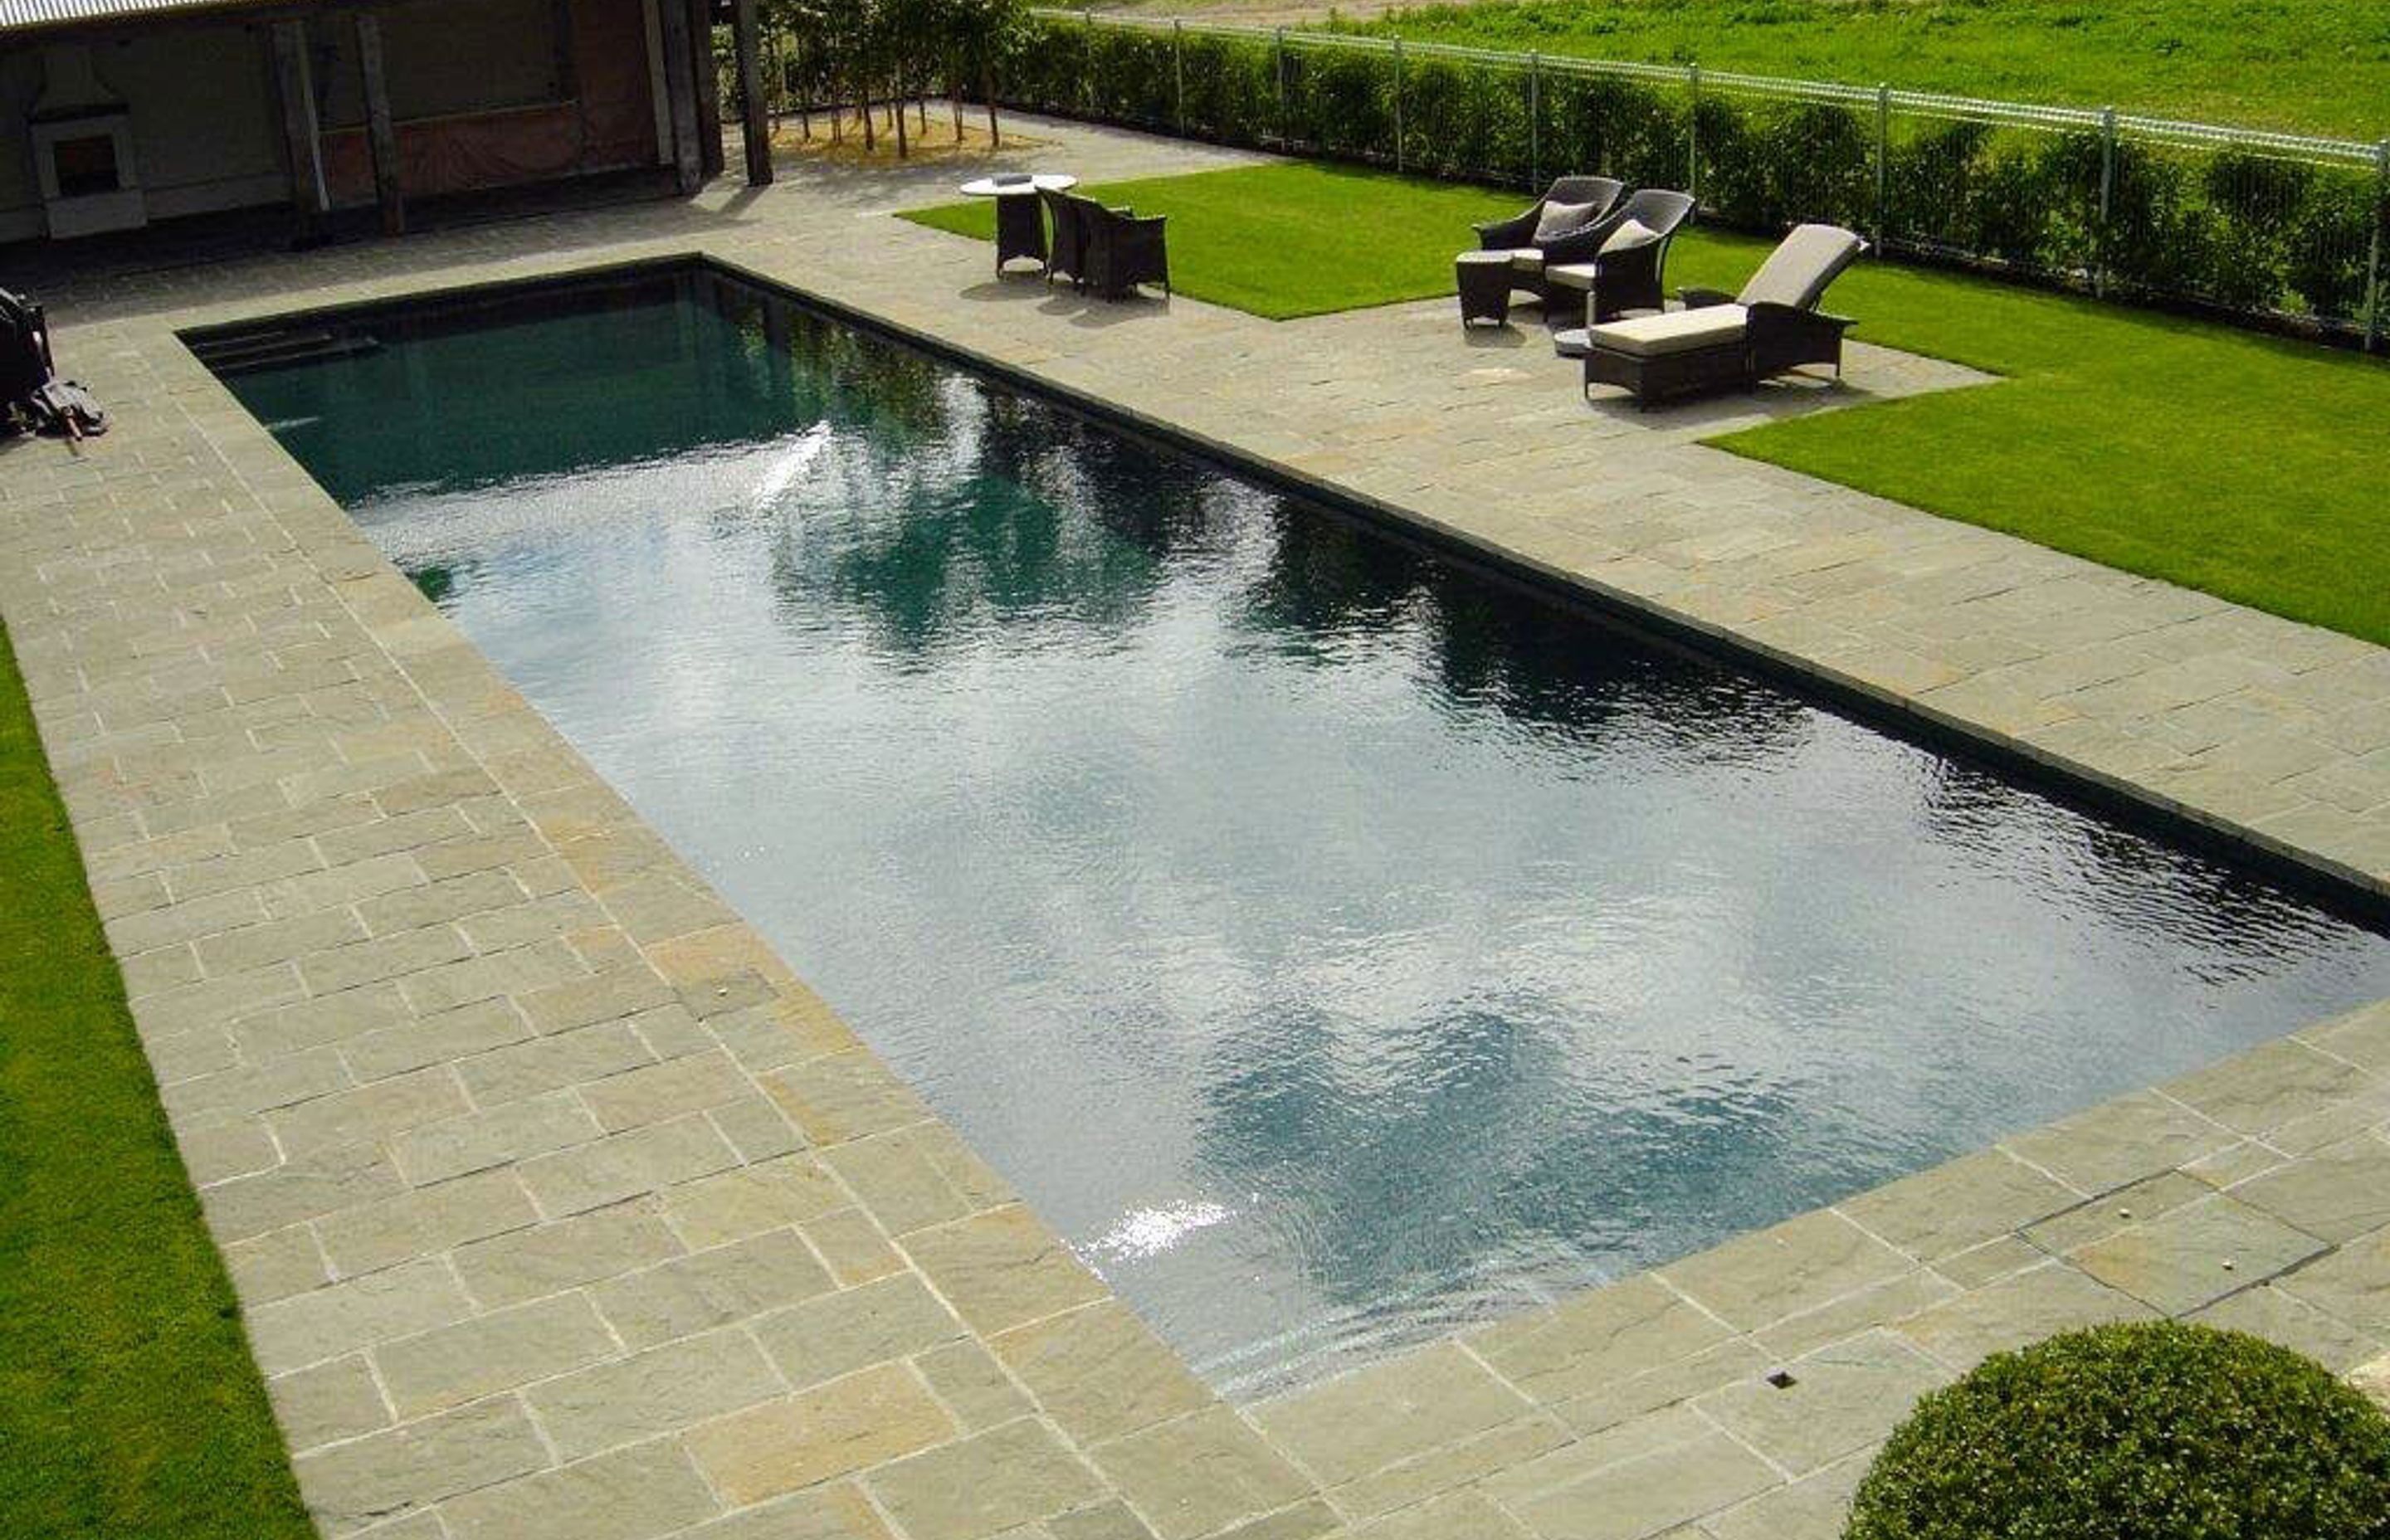 Create impact around your pool—and a naturally non-slip surface—by utilising Paradise Quarry paving stones as pool coping and surrounds.